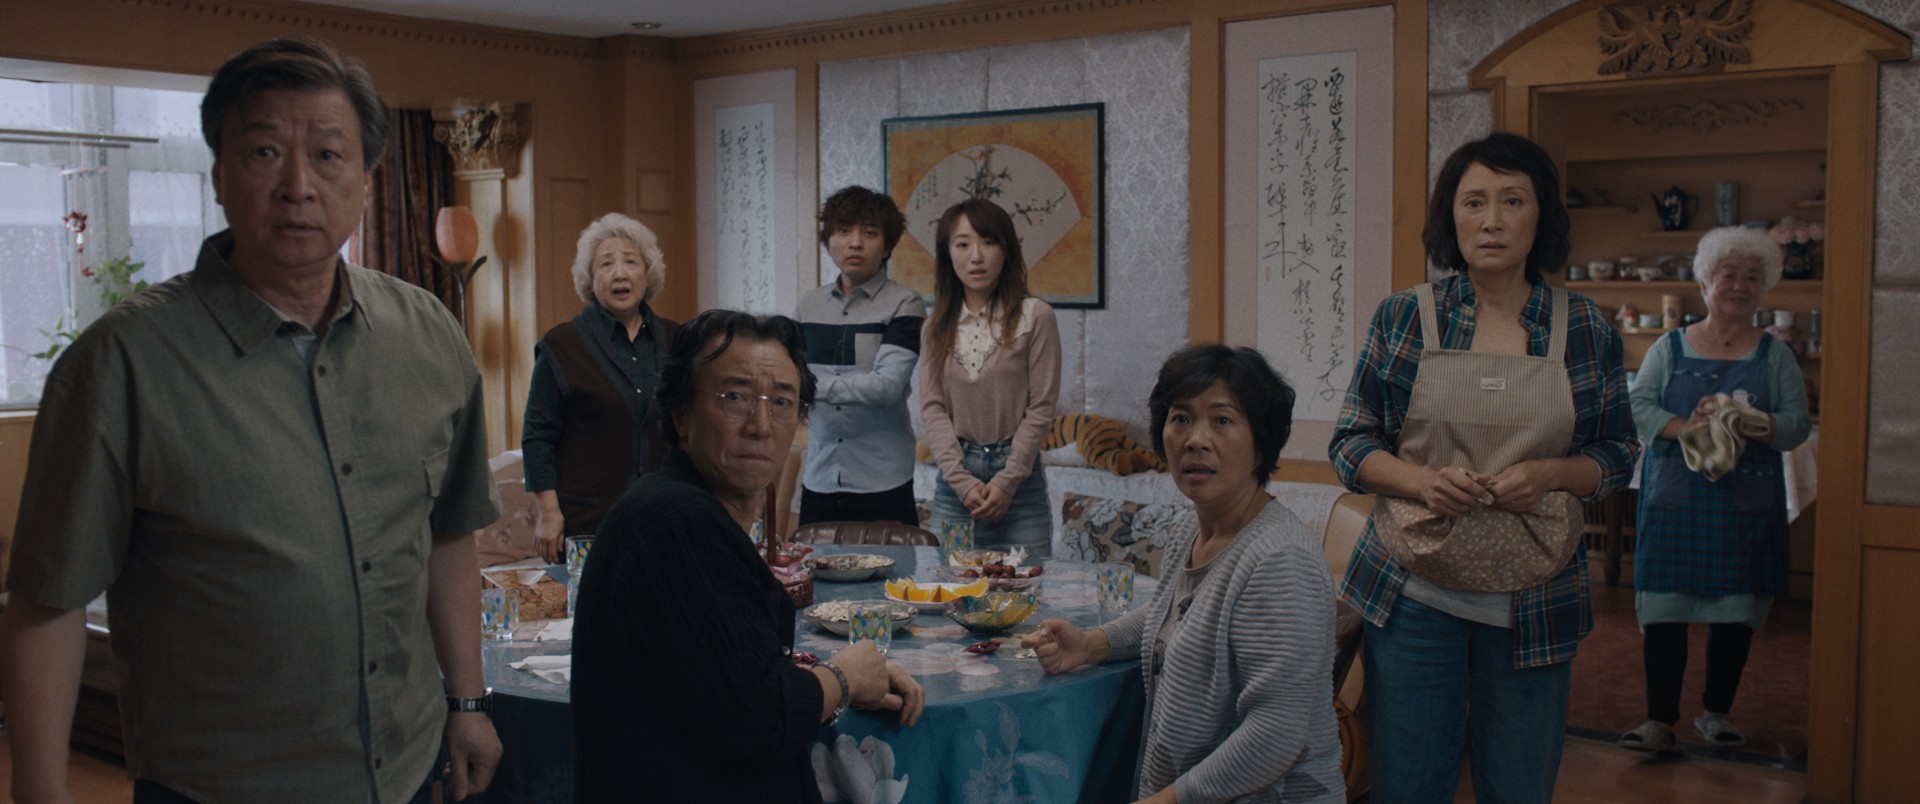 Still from the film "The Farewell" shoes a family of 8 gathered around a large table for a meal. They all look expectantly at the camera, some turning around in their chairs to stare.